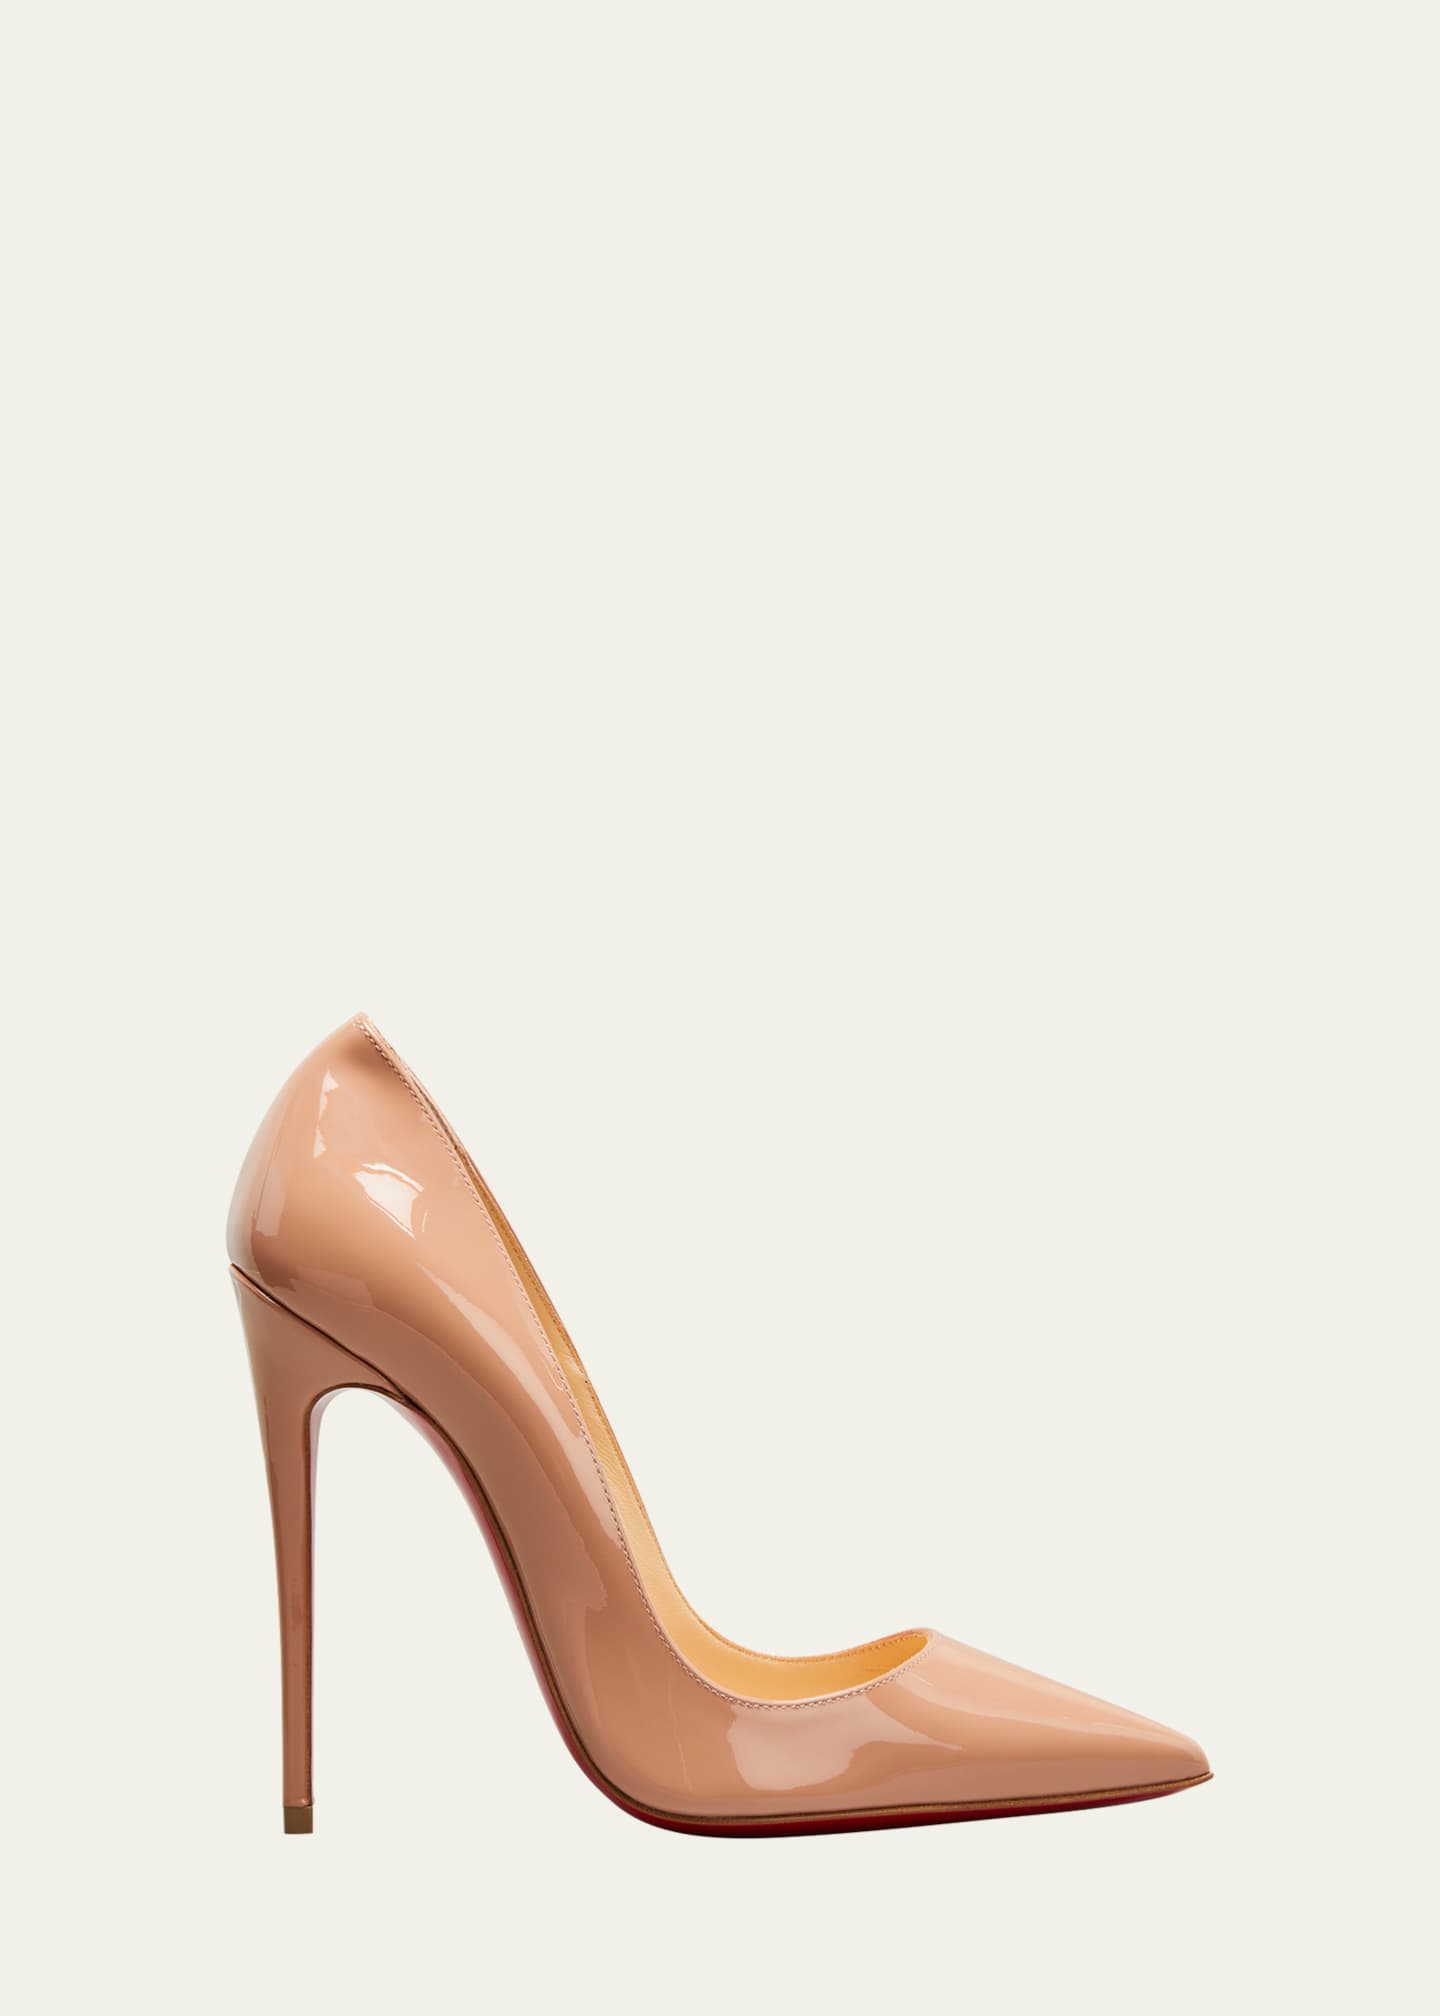 Christian Kate Patent Pointed-Toe Red Sole Pump - Bergdorf Goodman